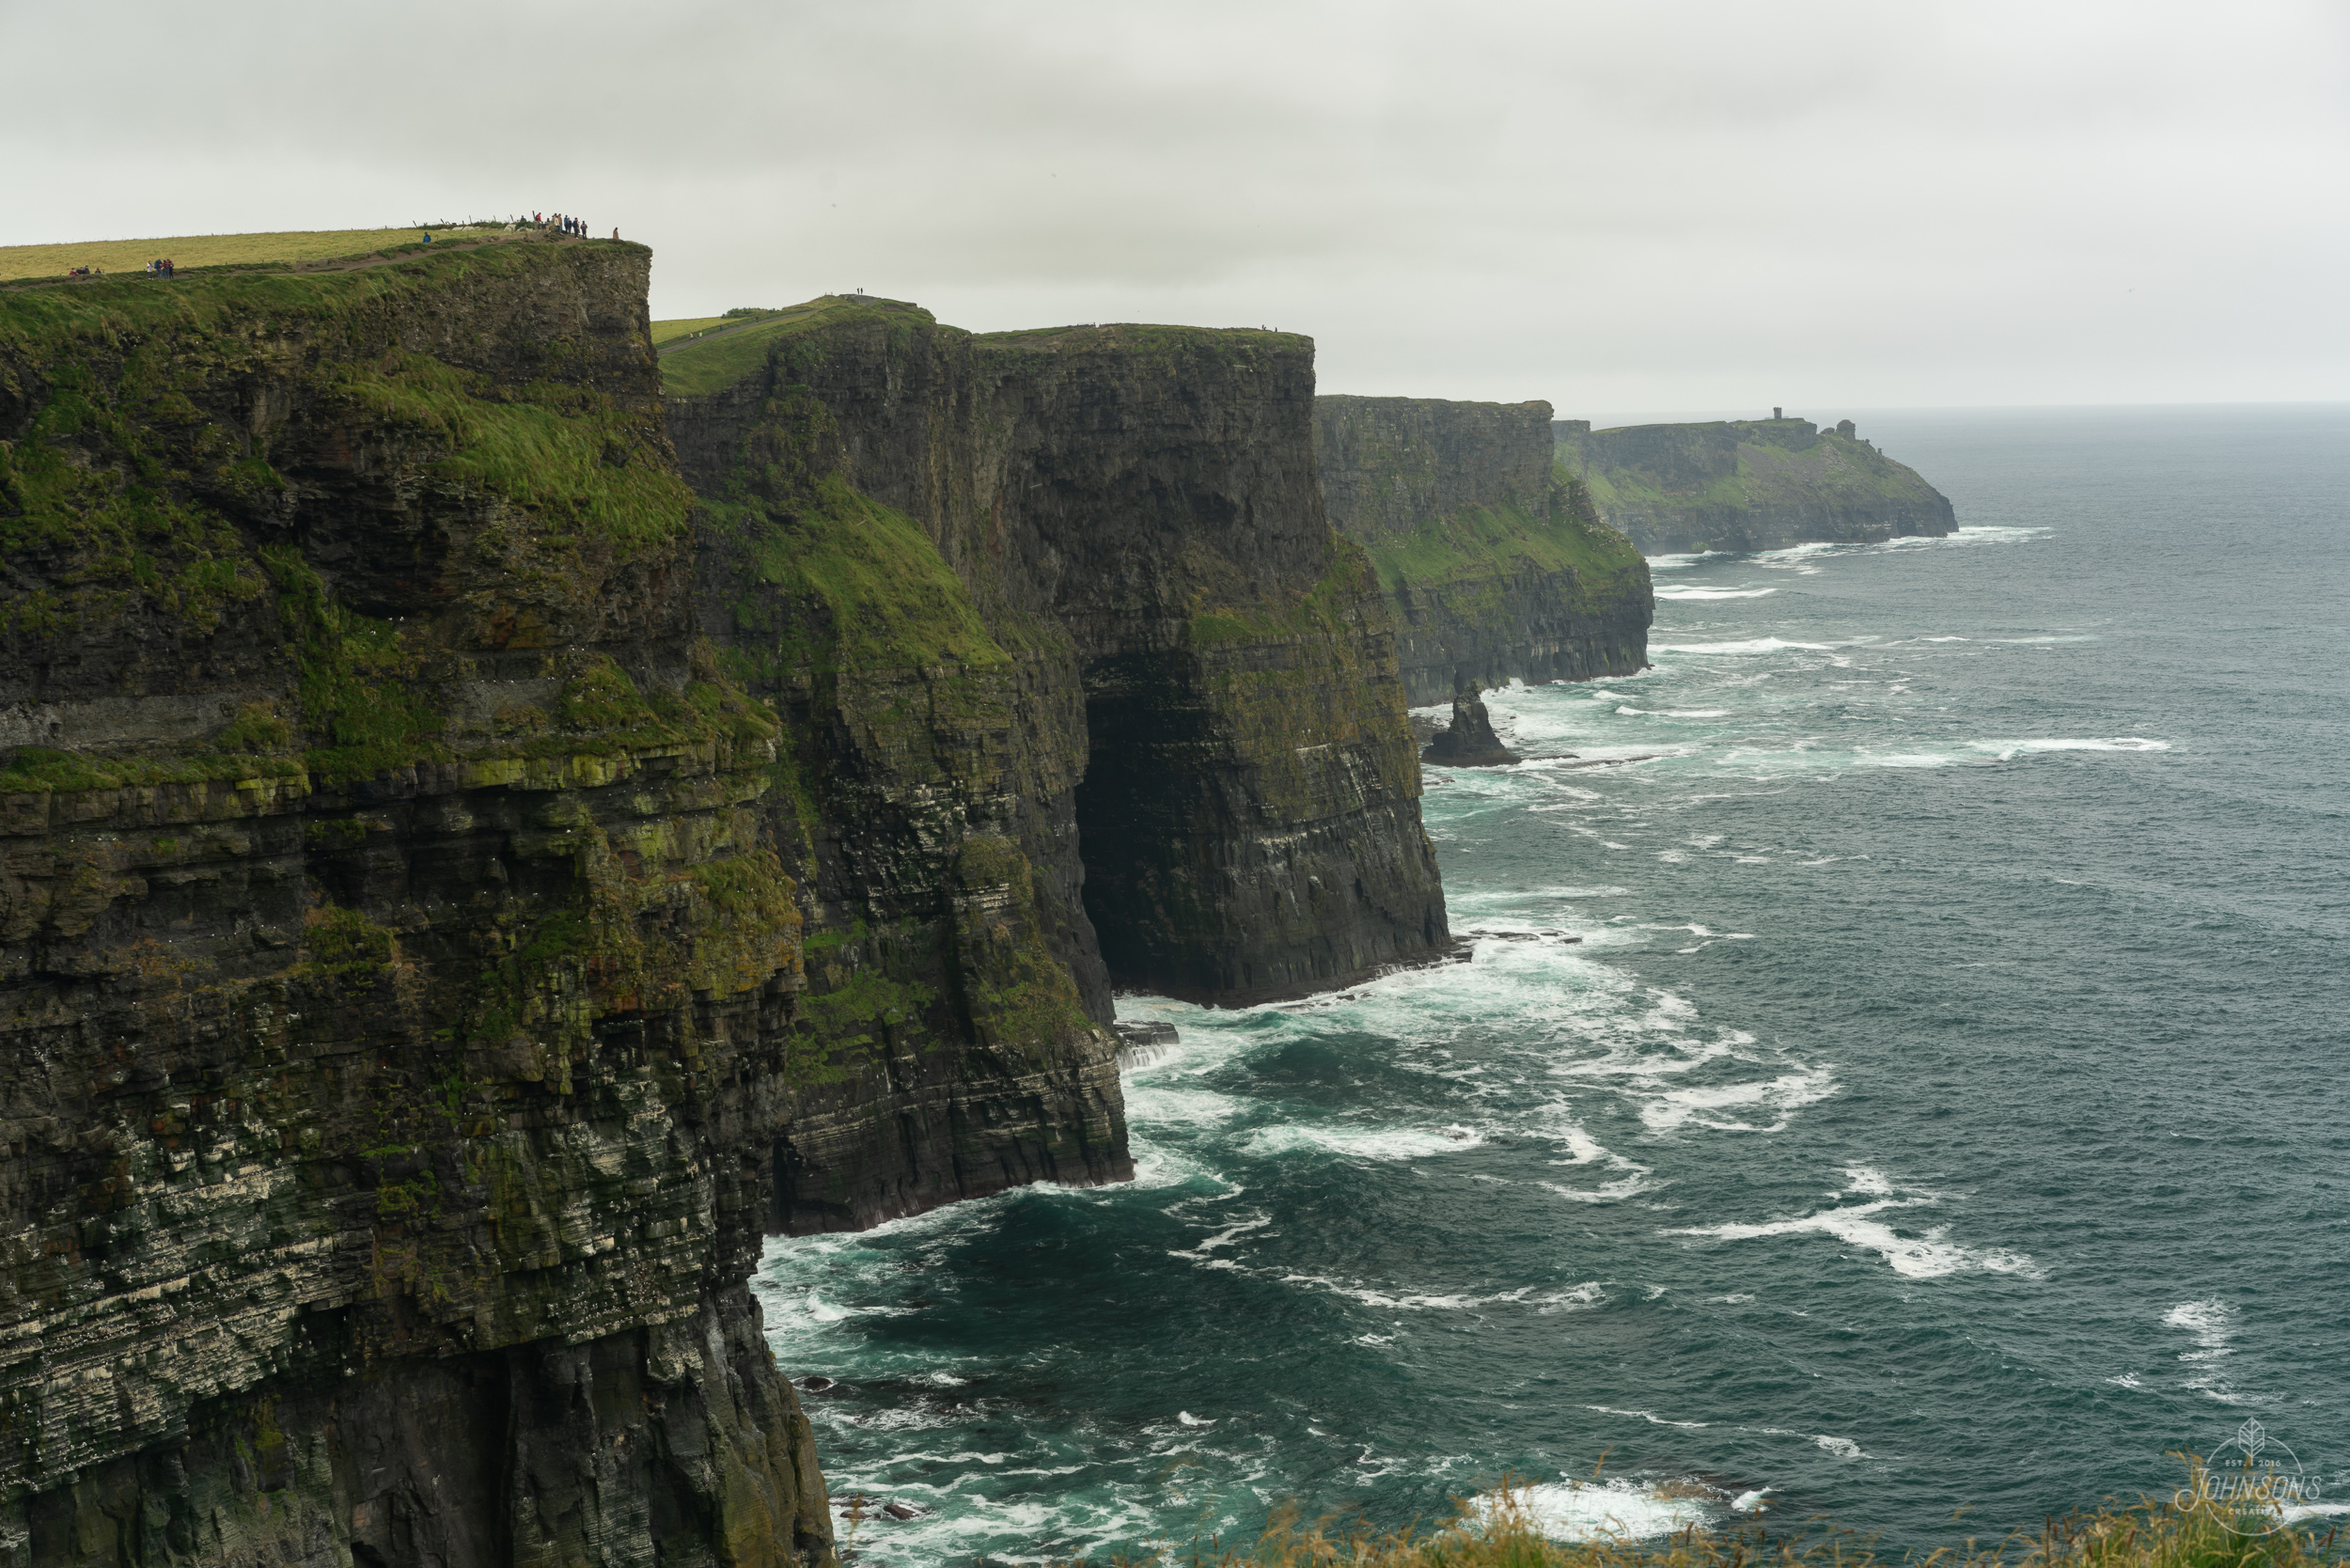  Sony a7rii | 55mm 1.8 | f10 | 1/13 sec | ISO 50 | Lee Circular Polarizing Filter  The Cliffs of Moher are definitely a thing. The road there is tiny and far from straight, and it was almost 10 Euros per person to park (apparently you can make a 2 ho